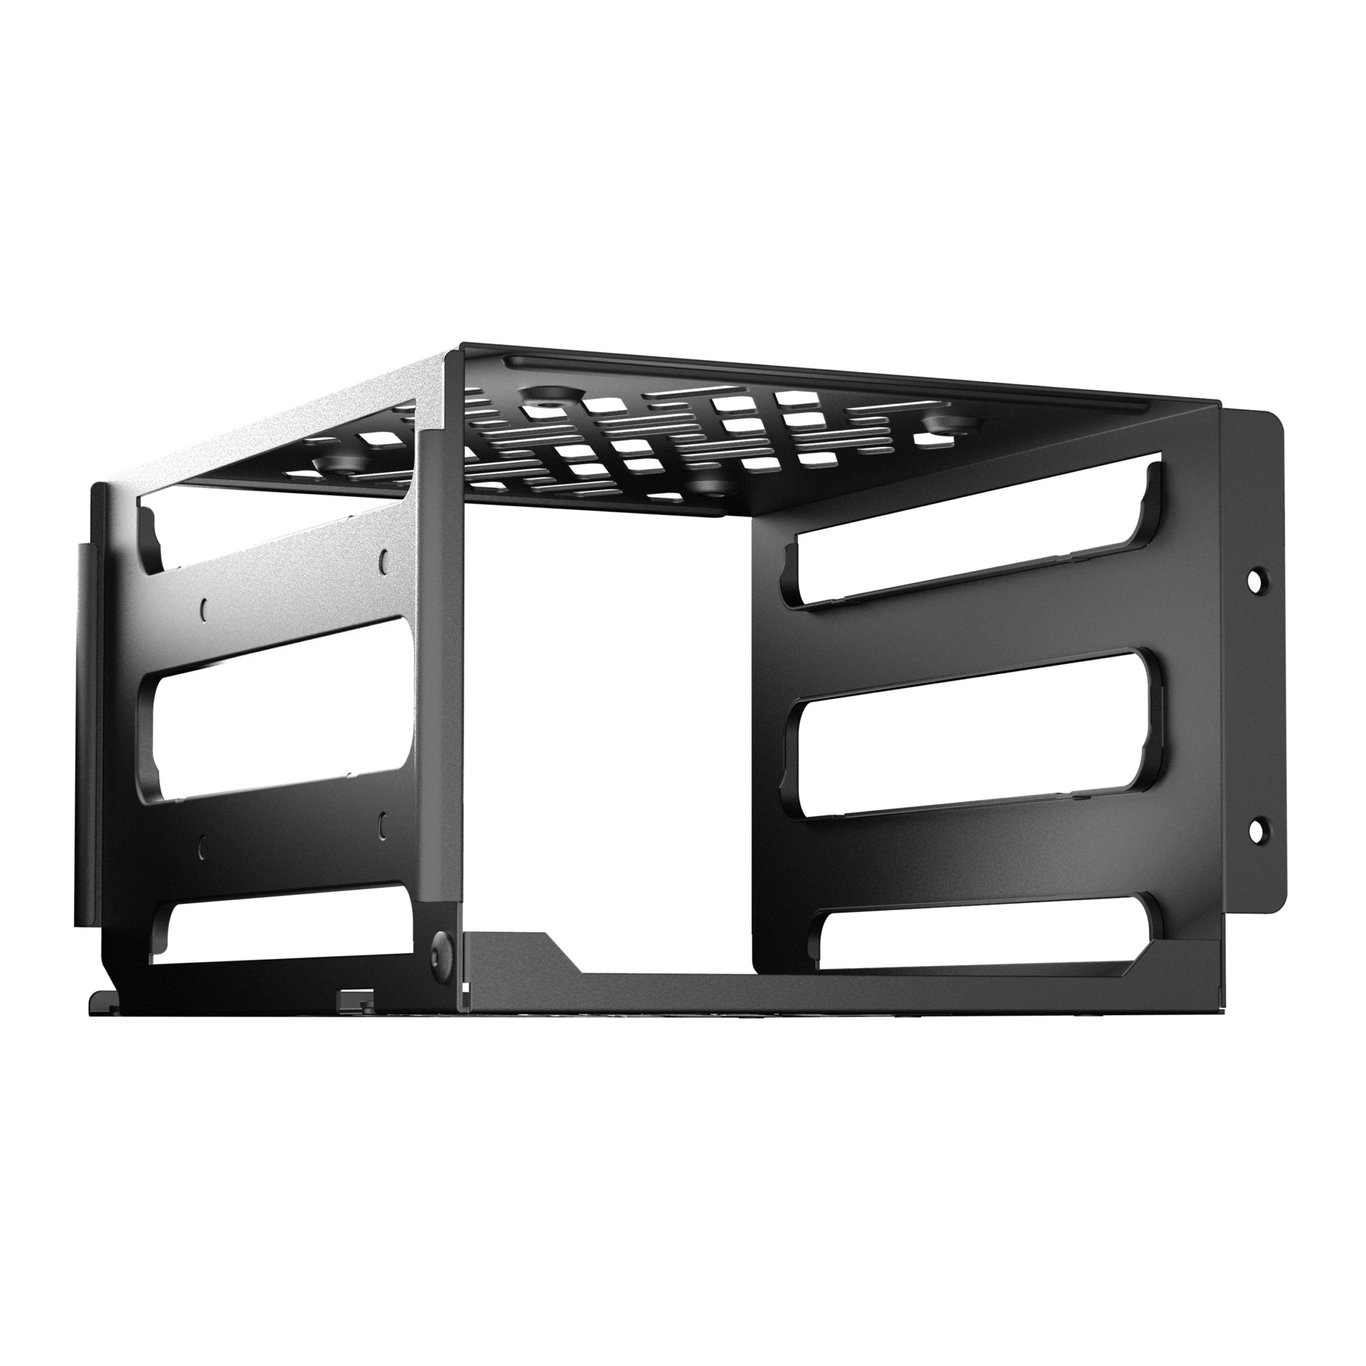 Fractal Design Hard Drive Cage Kit Type B For Define 7 or Meshify 2 Series